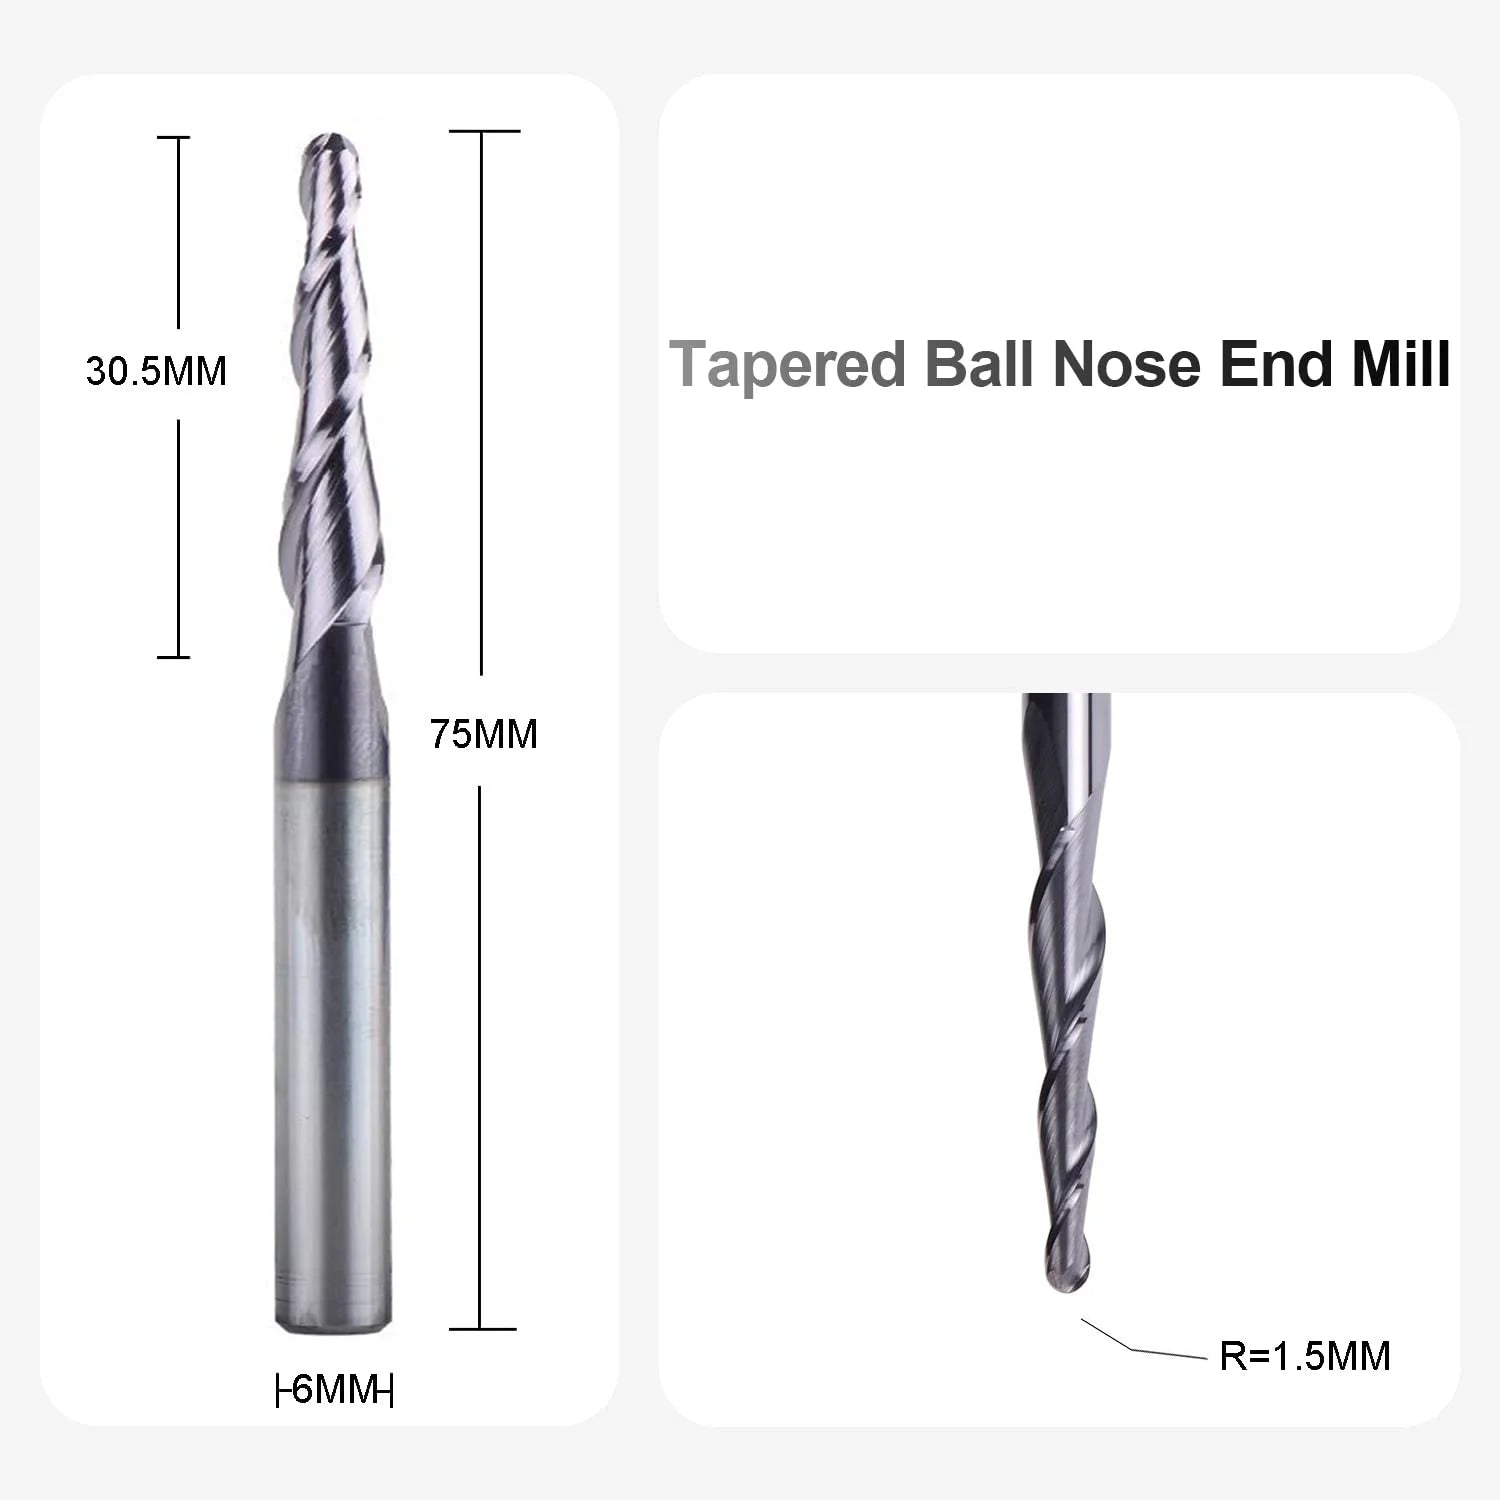 SpeTool UK 1.5MM Radius x 6MM SHANK x 30.5MM CL x 75MM OVL Tapered Ball Nose 2D & 3D Carving Router Bit